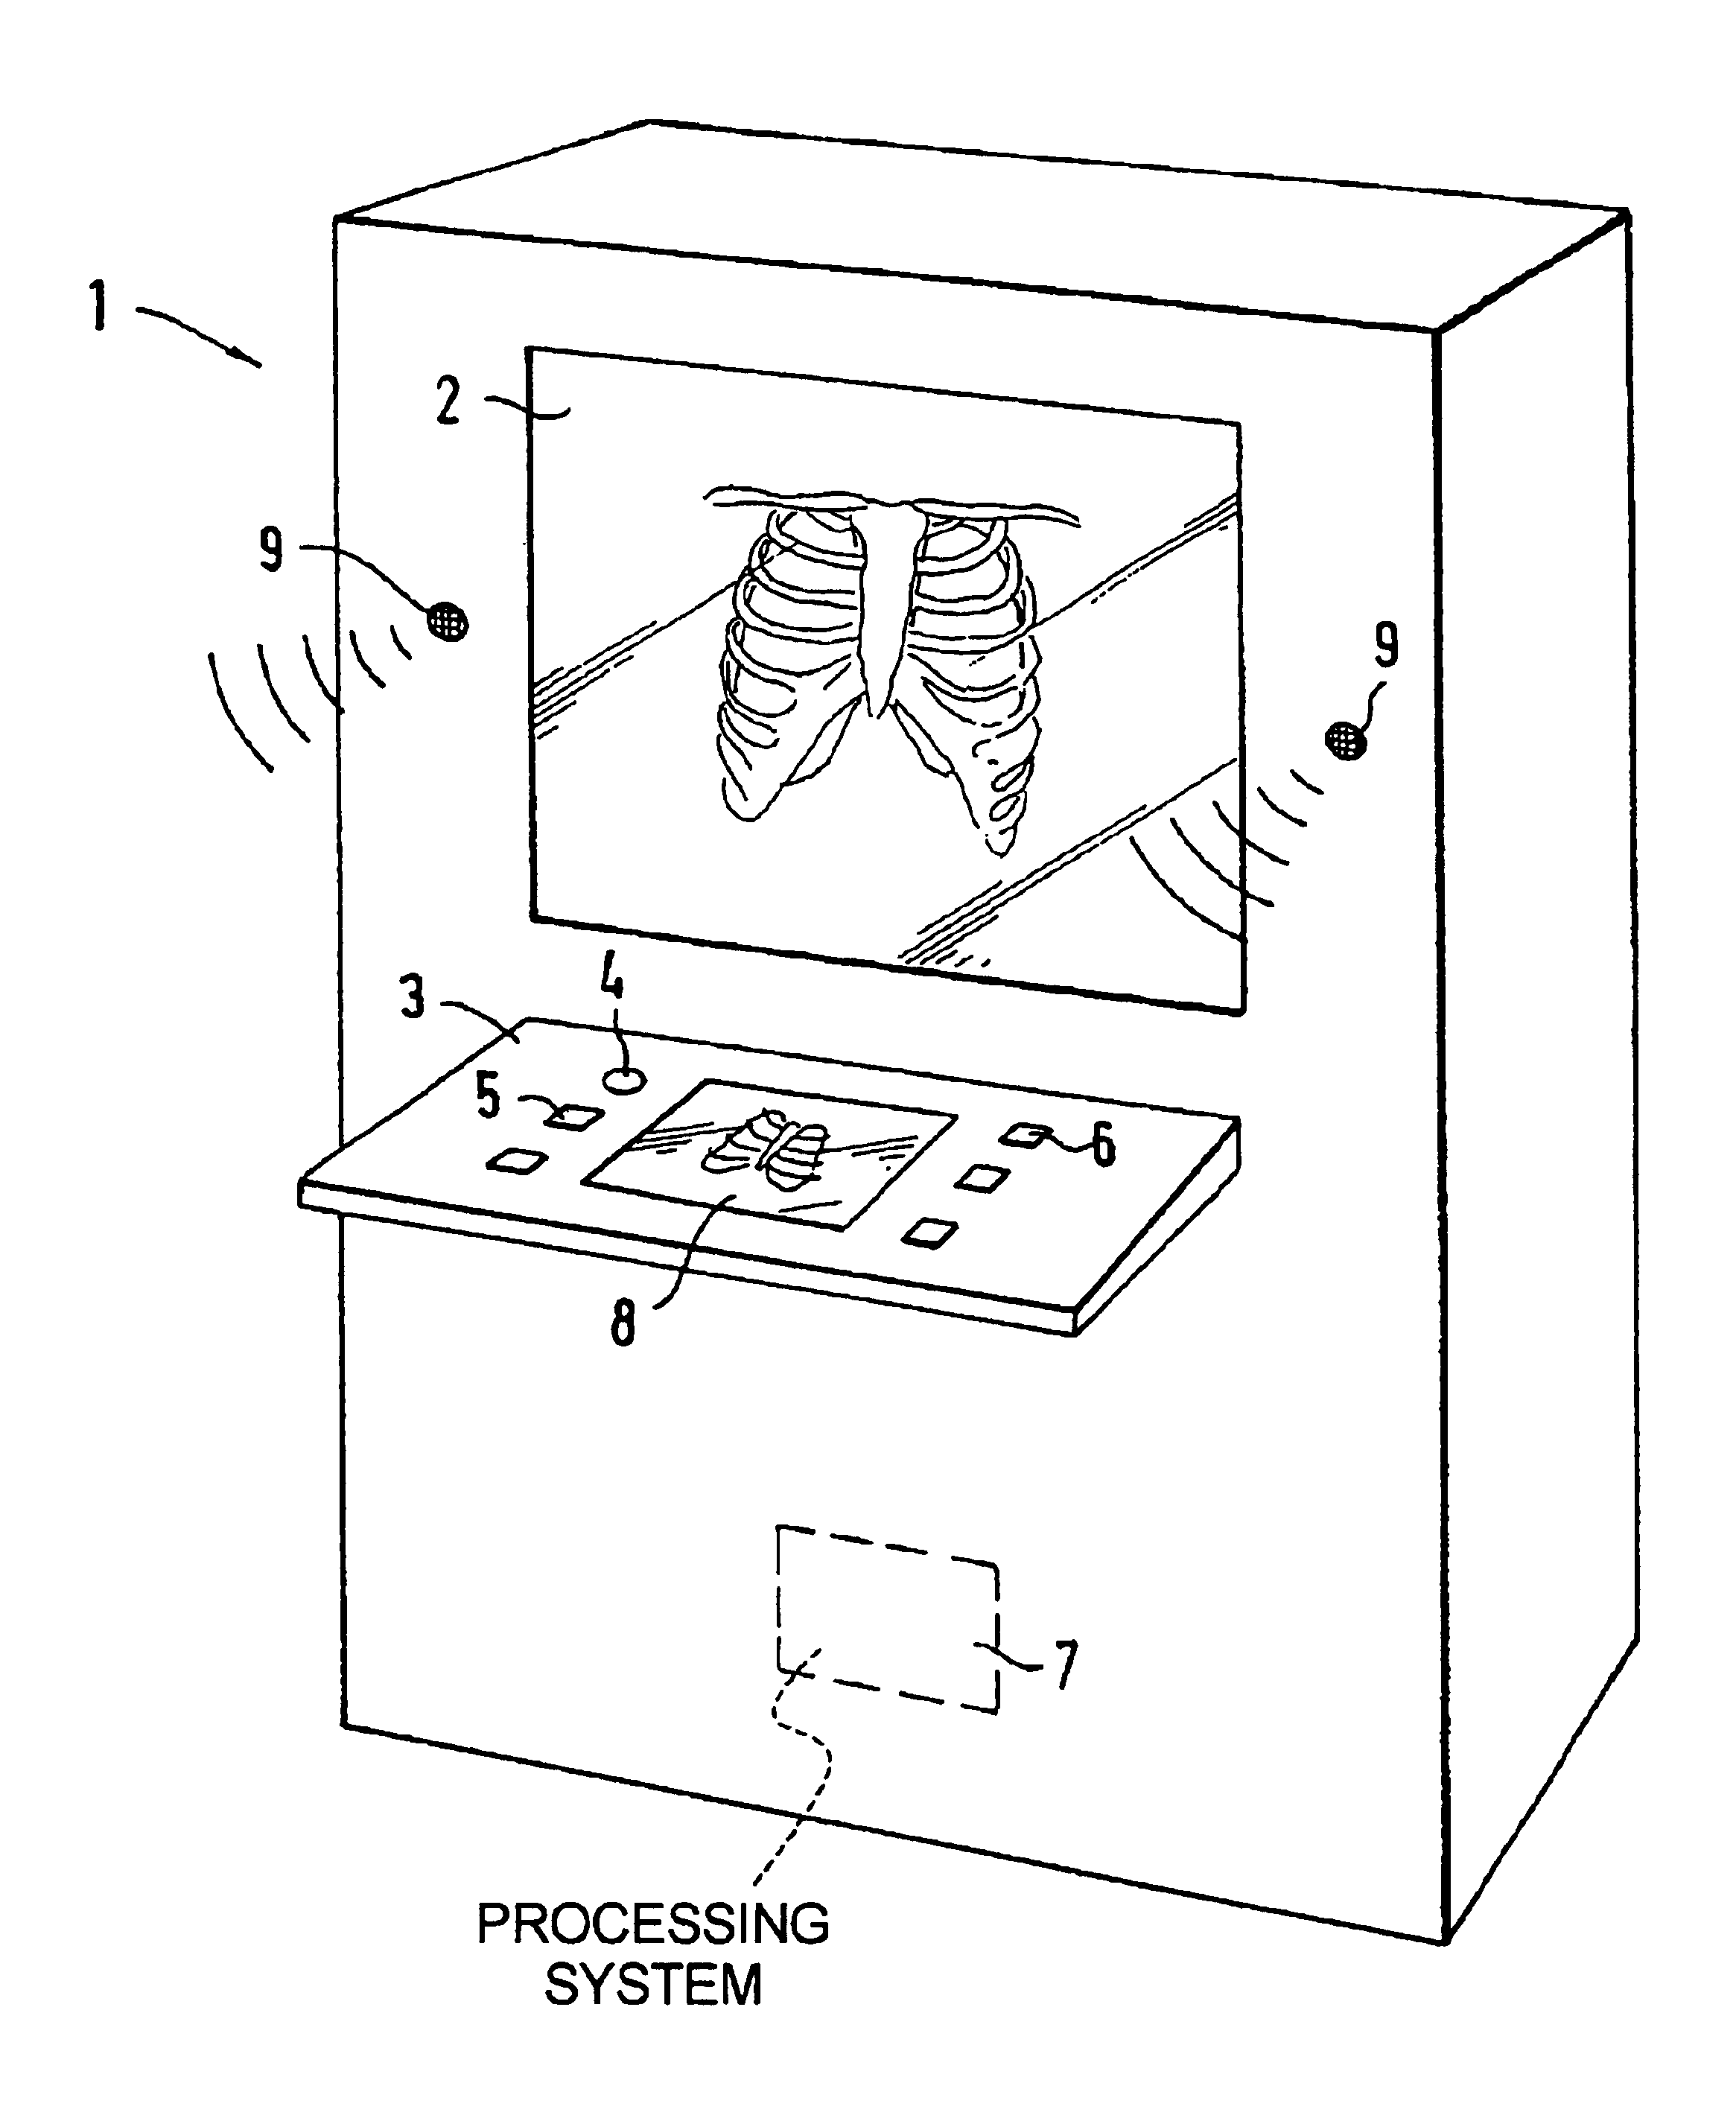 Method and apparatus for evaluating medical examination images